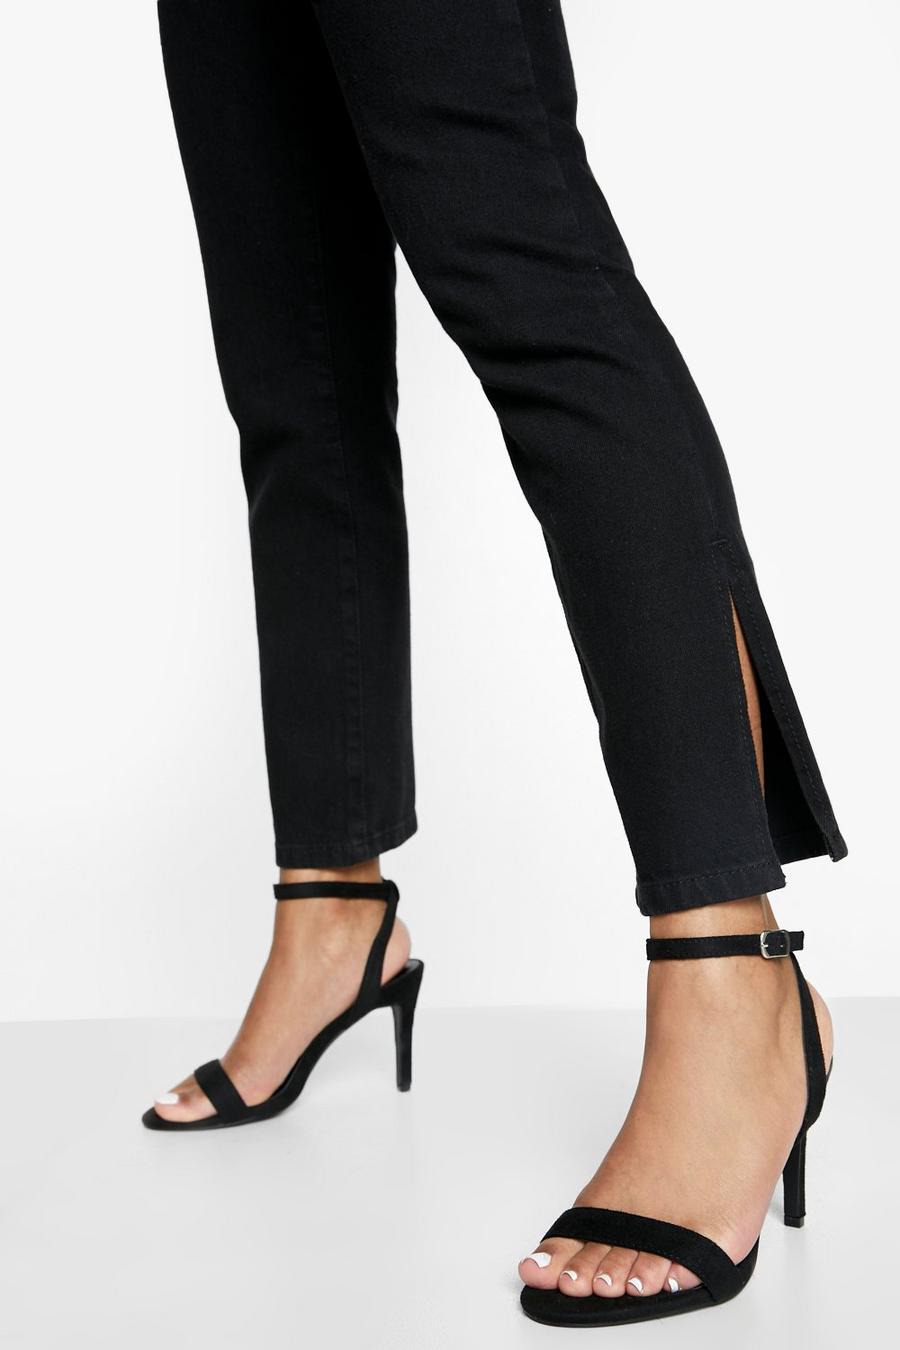 Black schwarz Low Barely There Heels